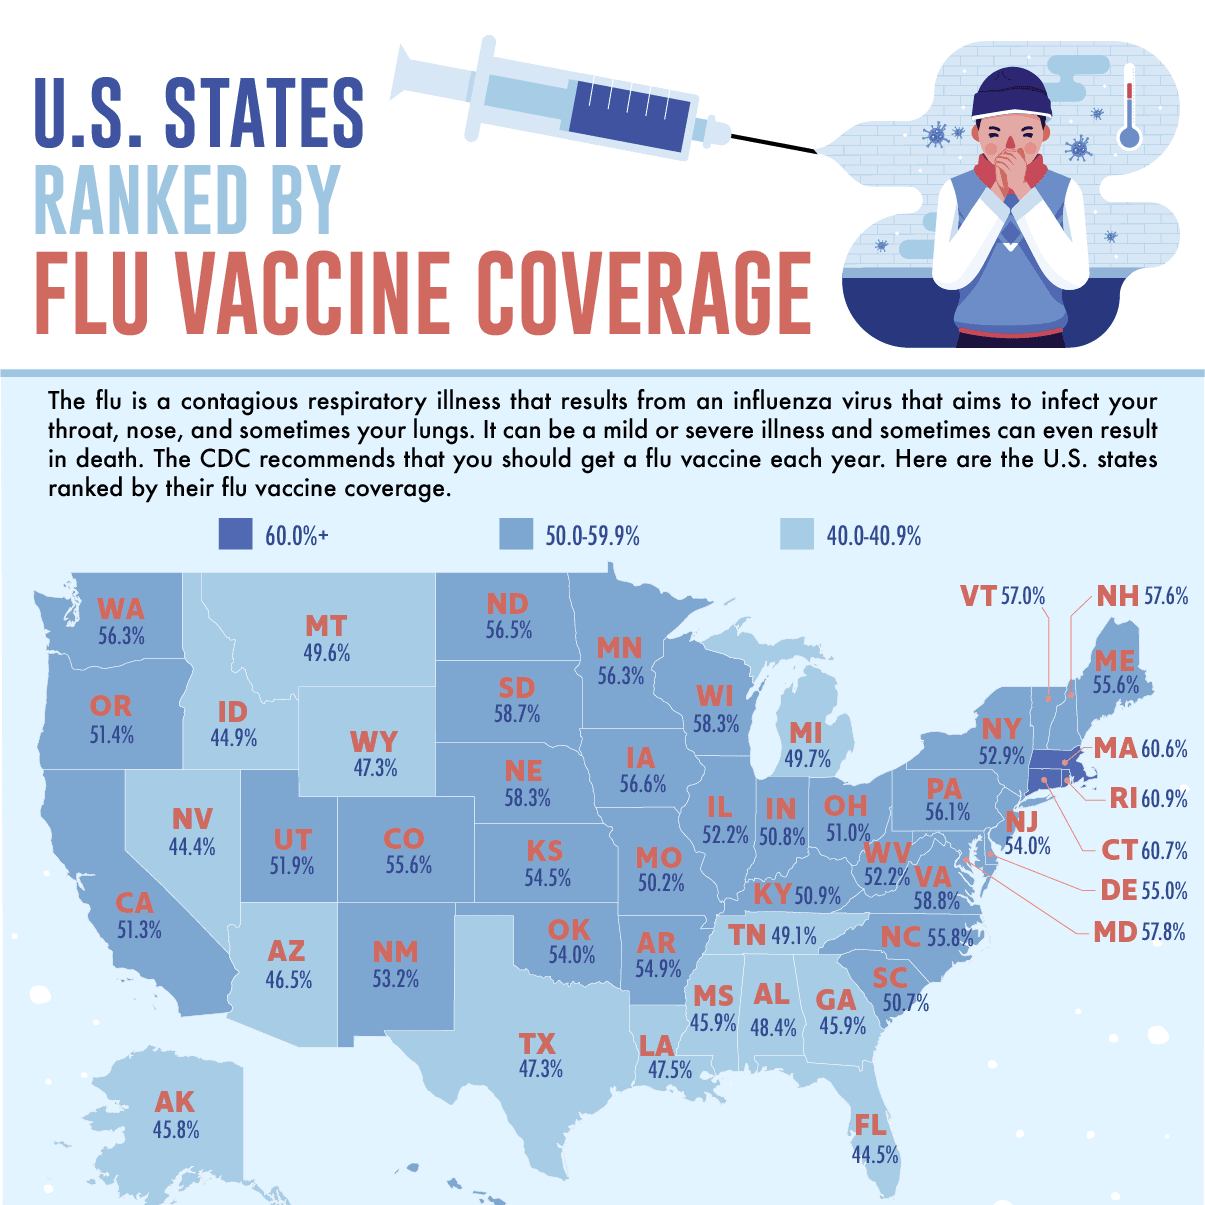 U.S. States Ranked by Flu Vaccine Coverage